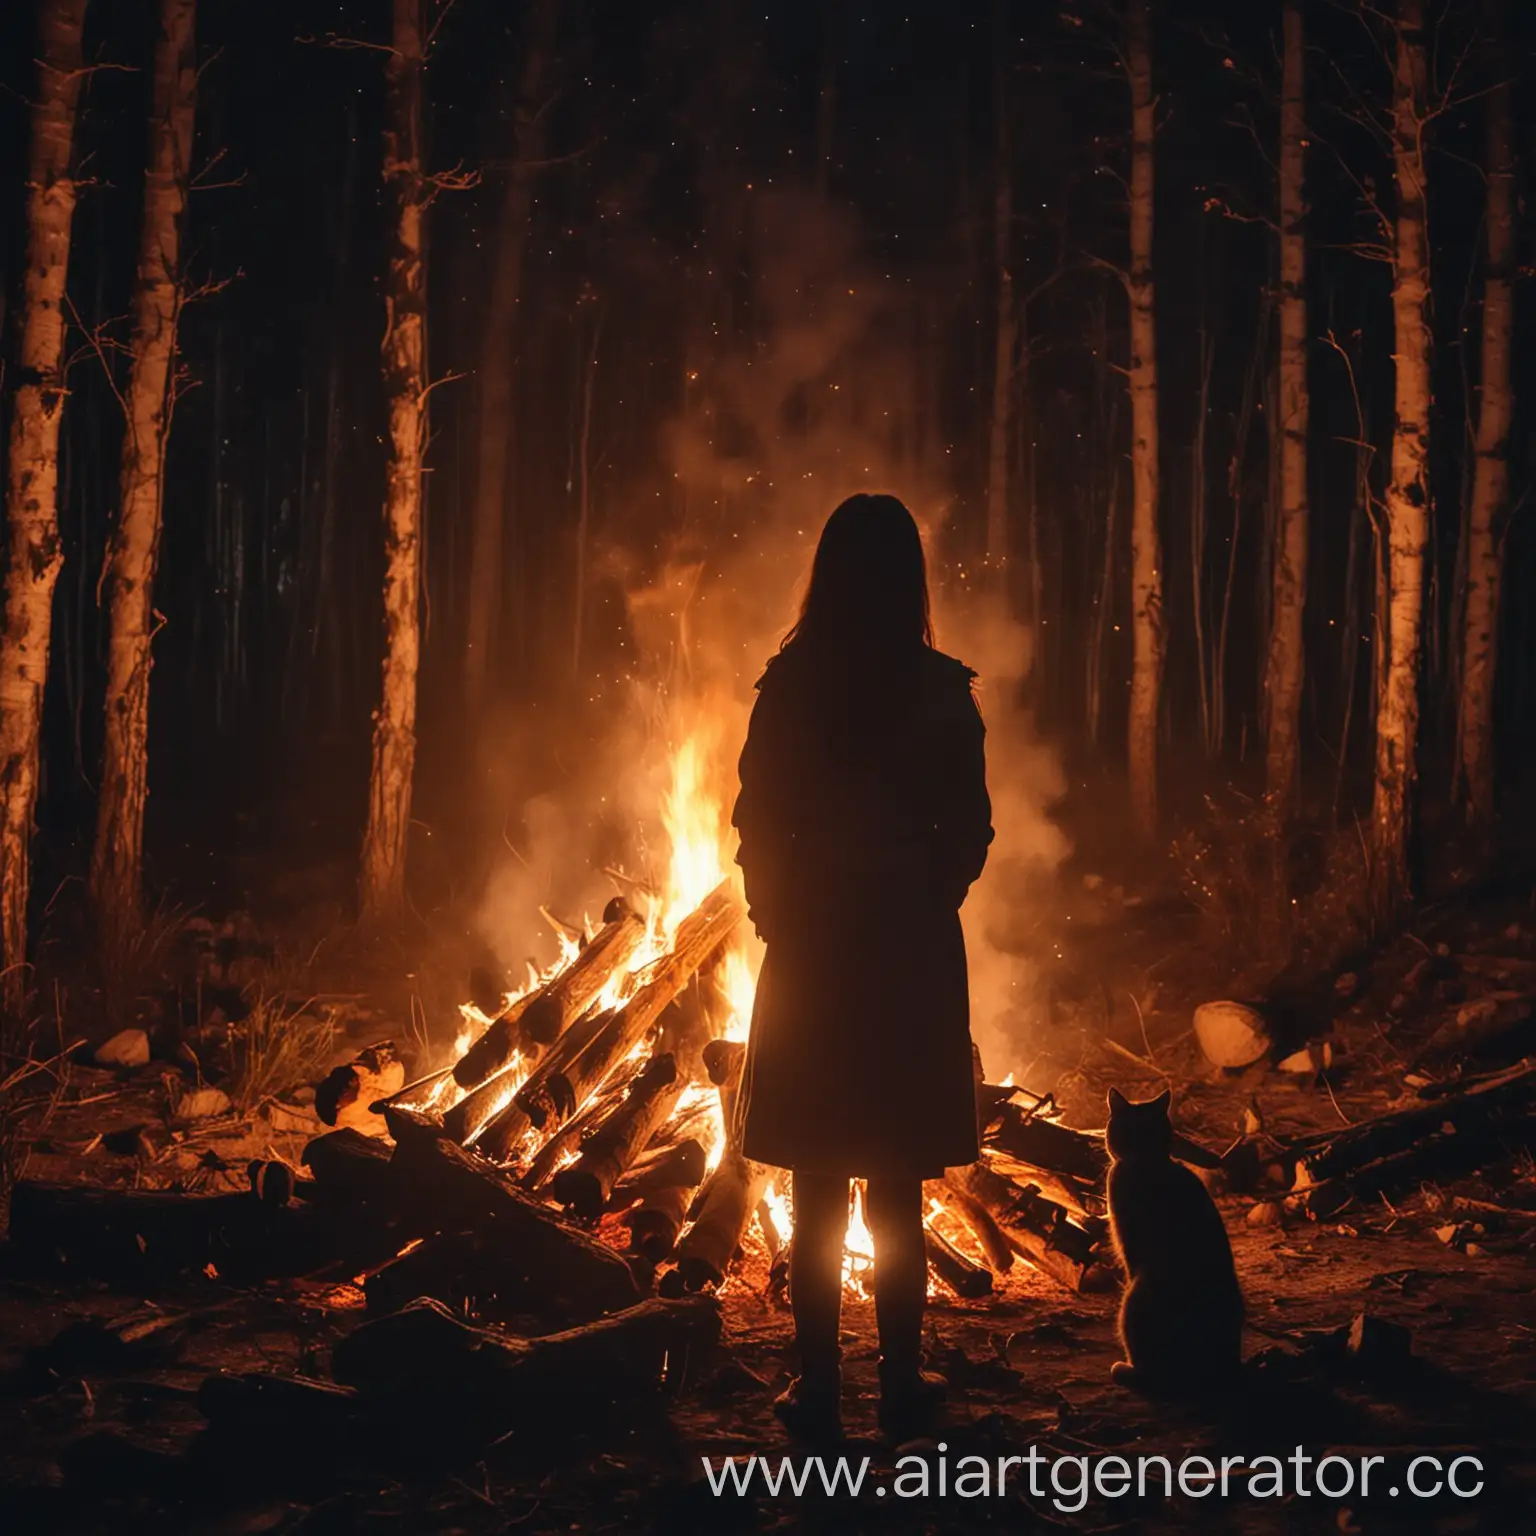 The girl stands next to a bonfire in the forest, with a cat beside her. The fire is burning, beautifully. night